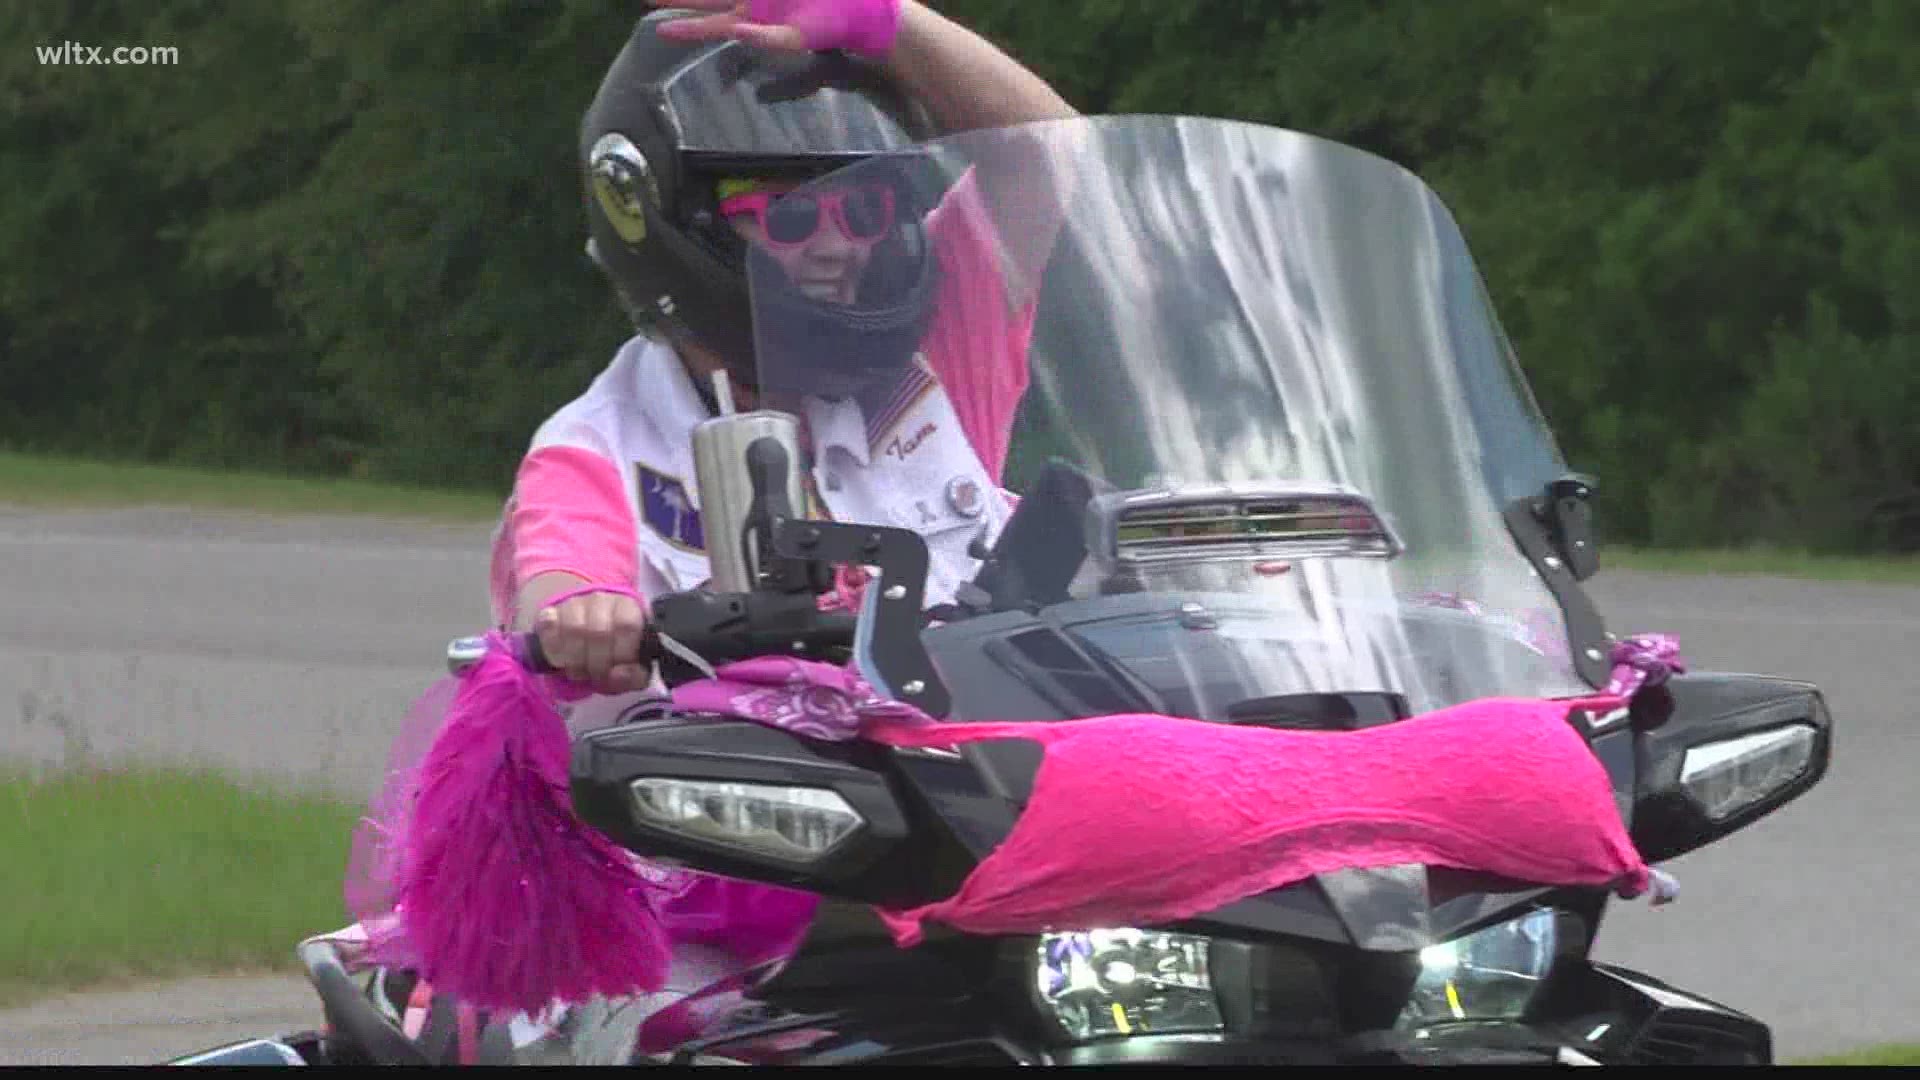 Leather was paired with hot pink as bikers from all over the Midlands rode in support of a woman's fight with breast cancer.